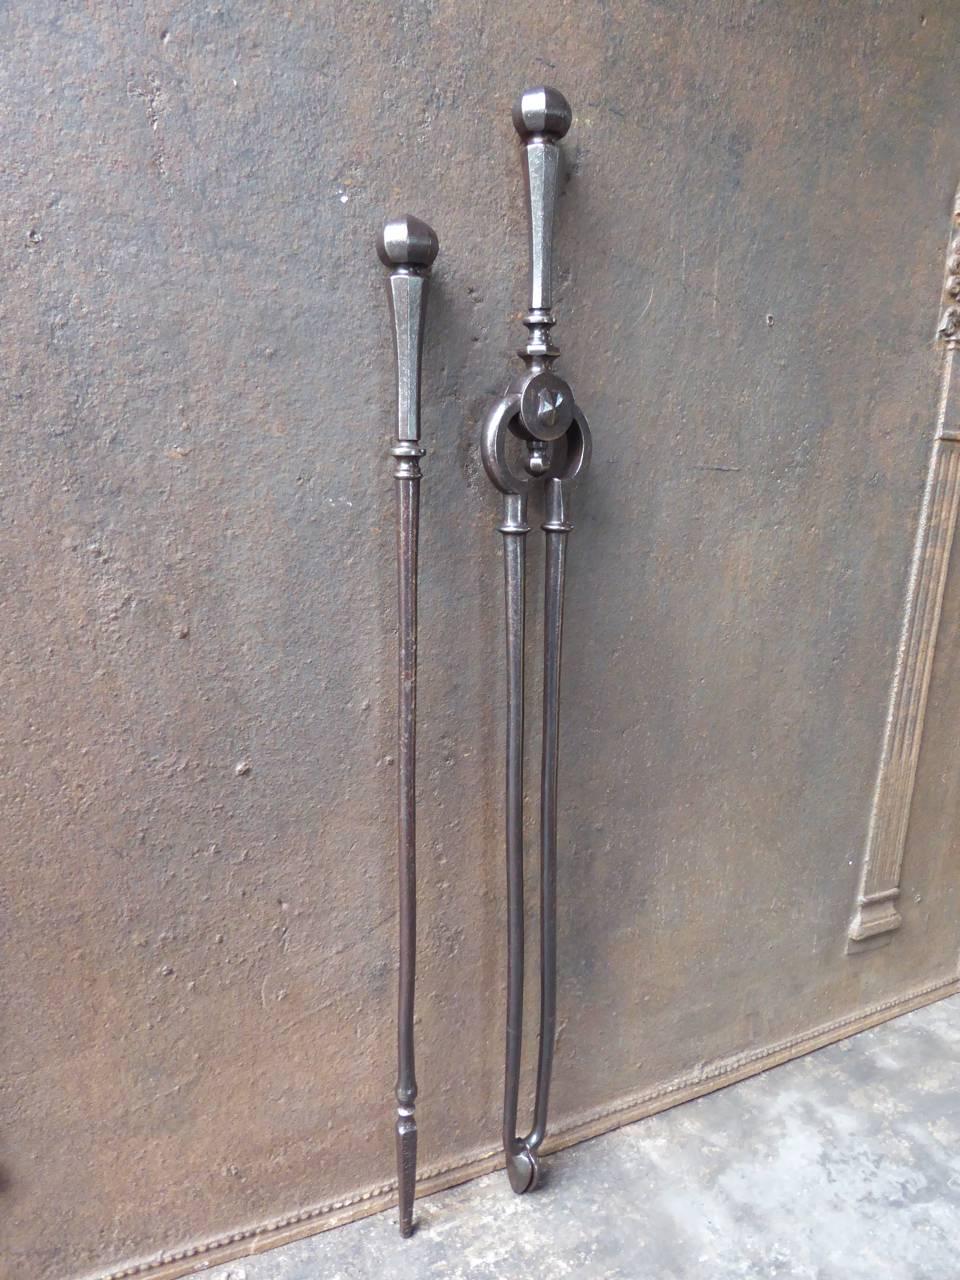 19th century English fireplace tool set, fire irons made of wrought iron.

We have a unique and specialized collection of antique and used fireplace accessories consisting of more than 1000 listings at 1stdibs. Amongst others, we always have 300+